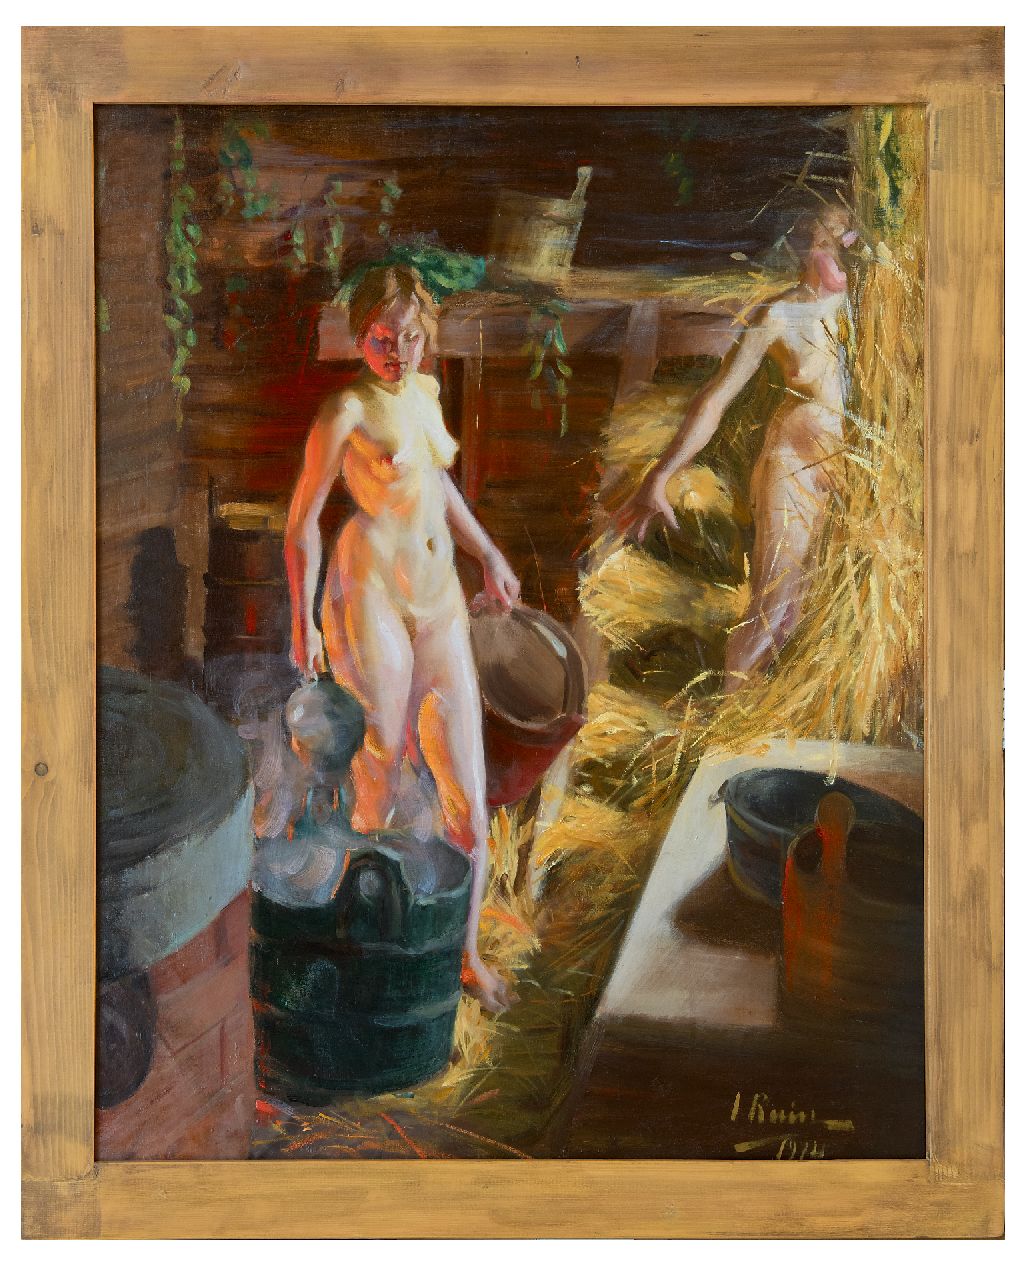 Ruin I.L.  | Ingrid Linnea Ruin | Paintings offered for sale | Two girls in a sauna, oil on canvas 92.3 x 76.3 cm, signed l.r. and dated 1914